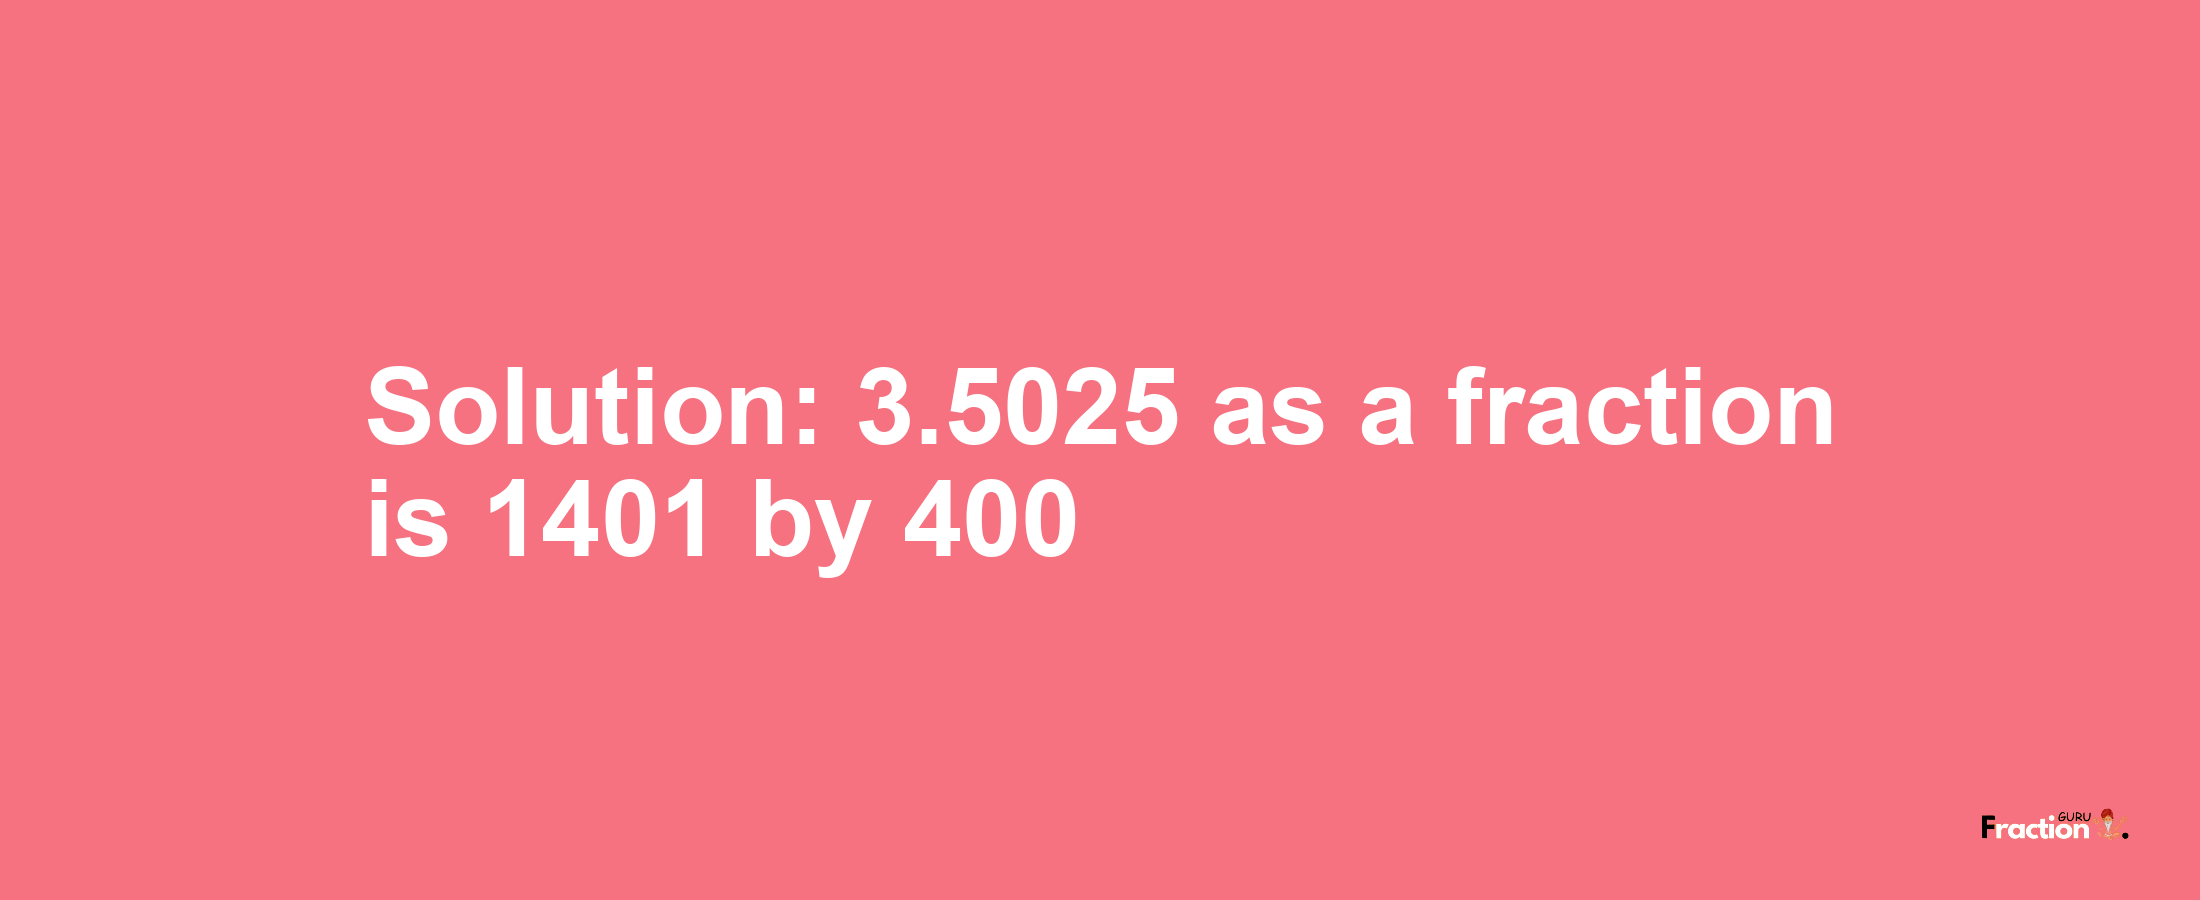 Solution:3.5025 as a fraction is 1401/400